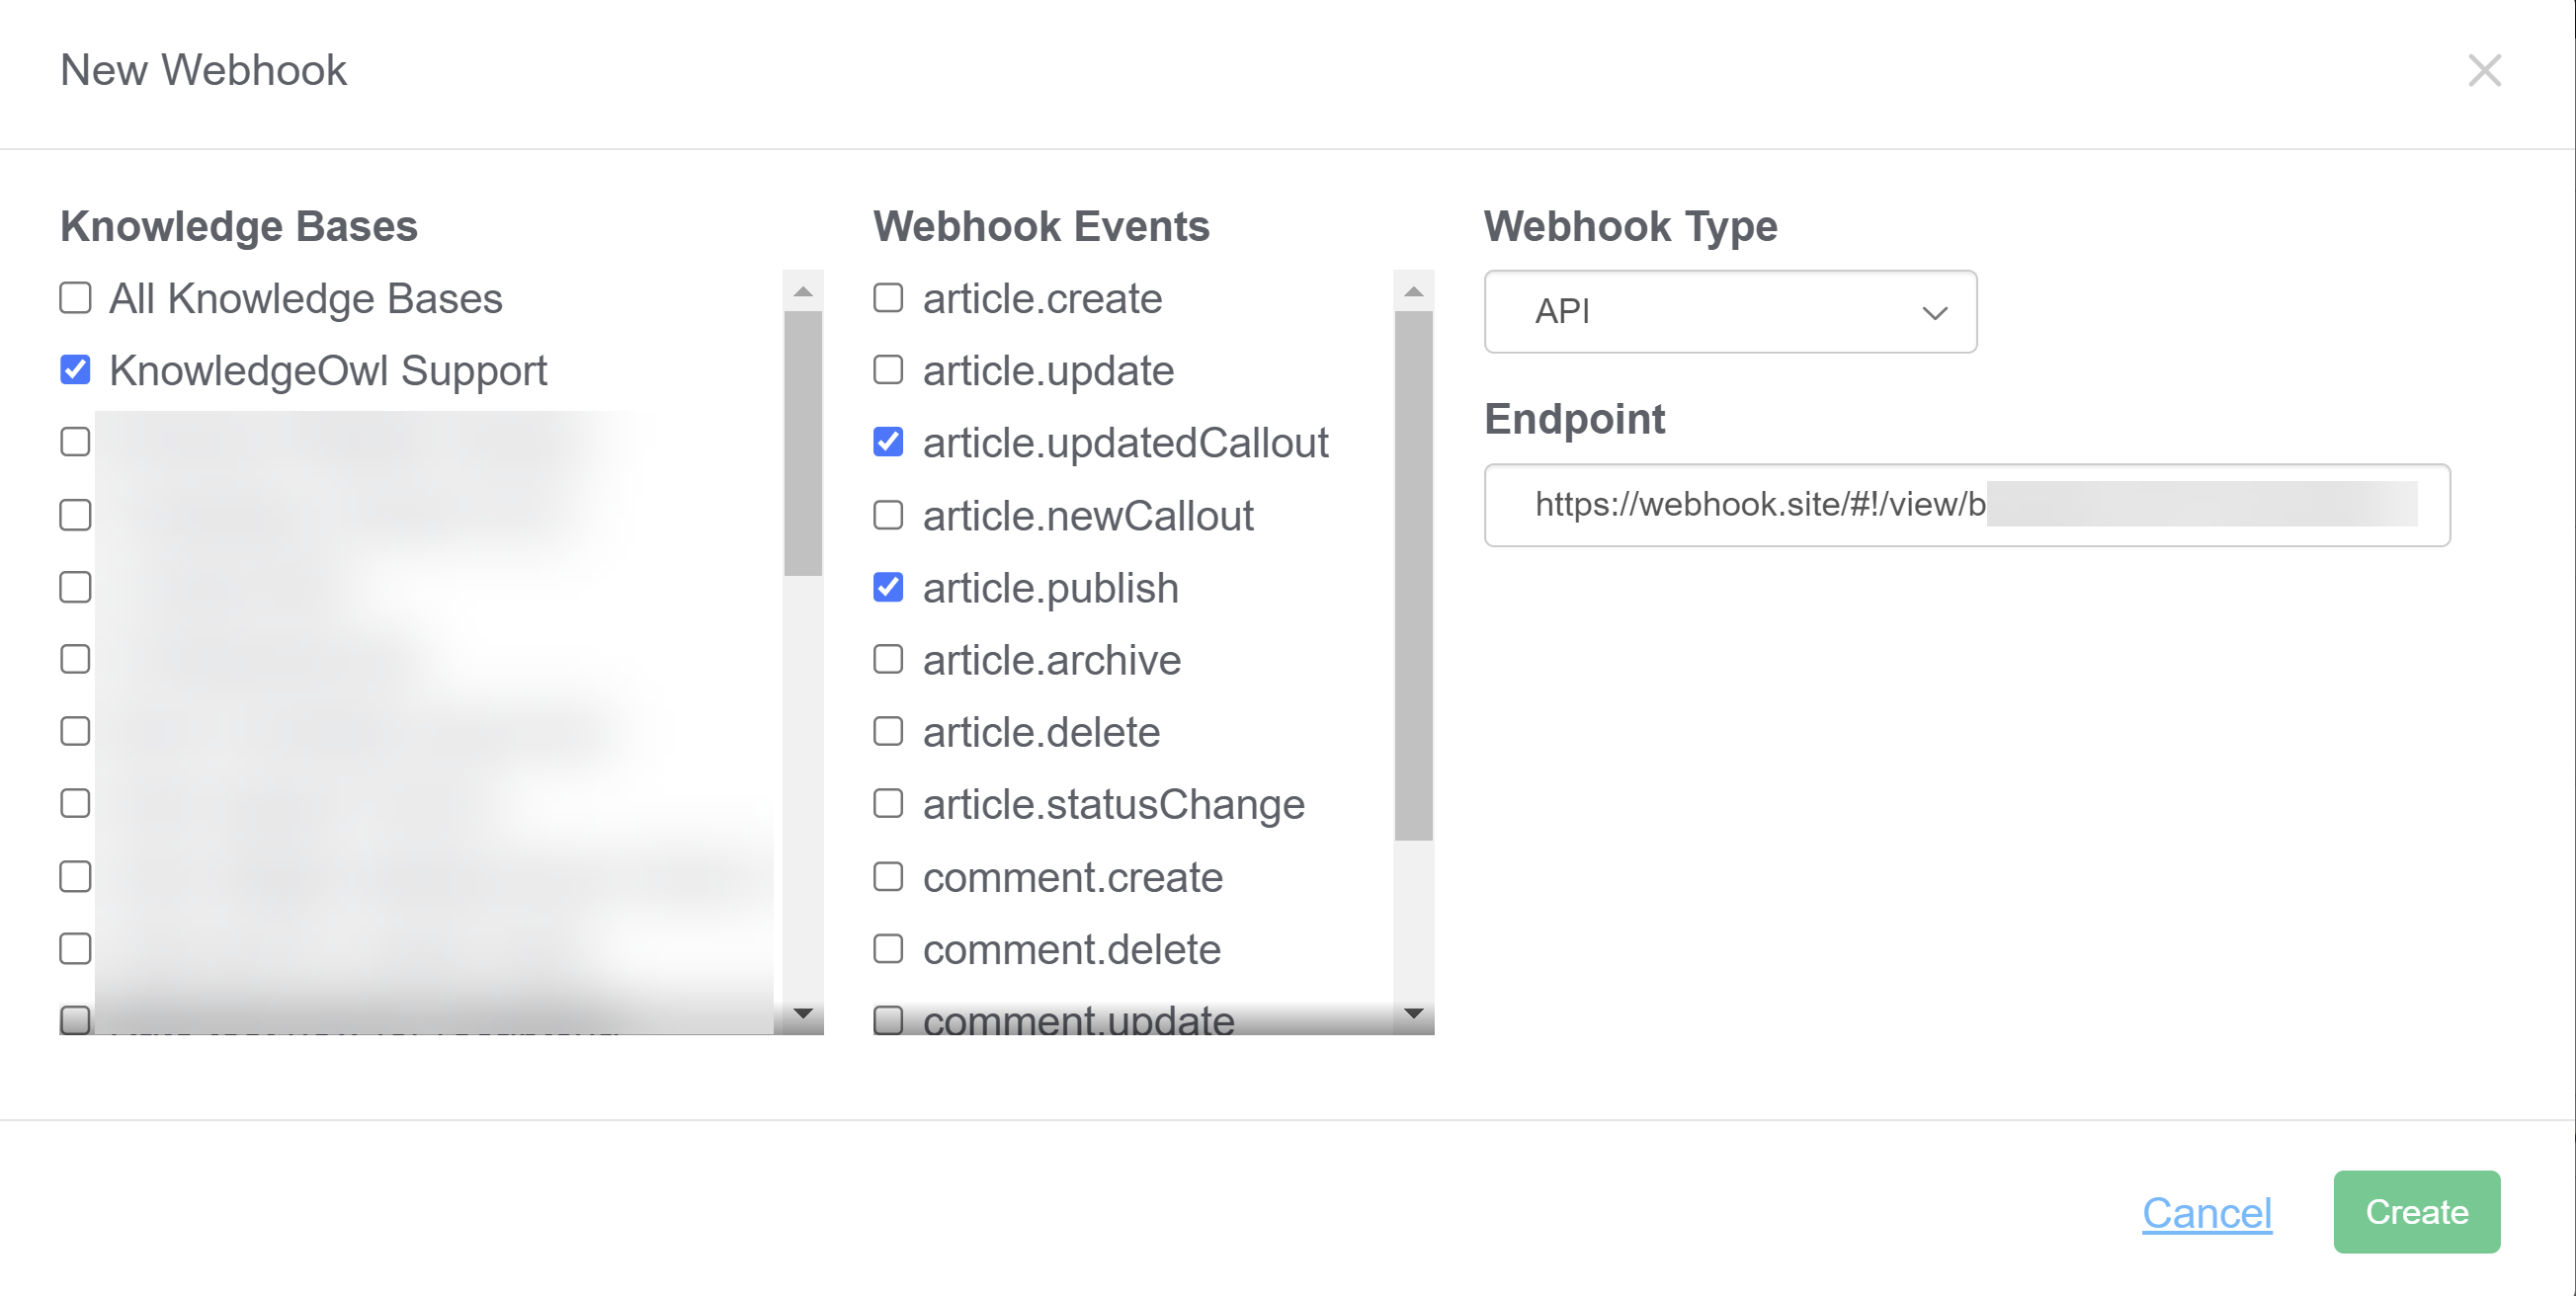 Screenshot of a sample completed New Webhook configuration pop-up with two knowledge bases selected, the article.publish Webhook Event checkbox selected, Slack Webhook Type selected, and a Slack endpoint entered